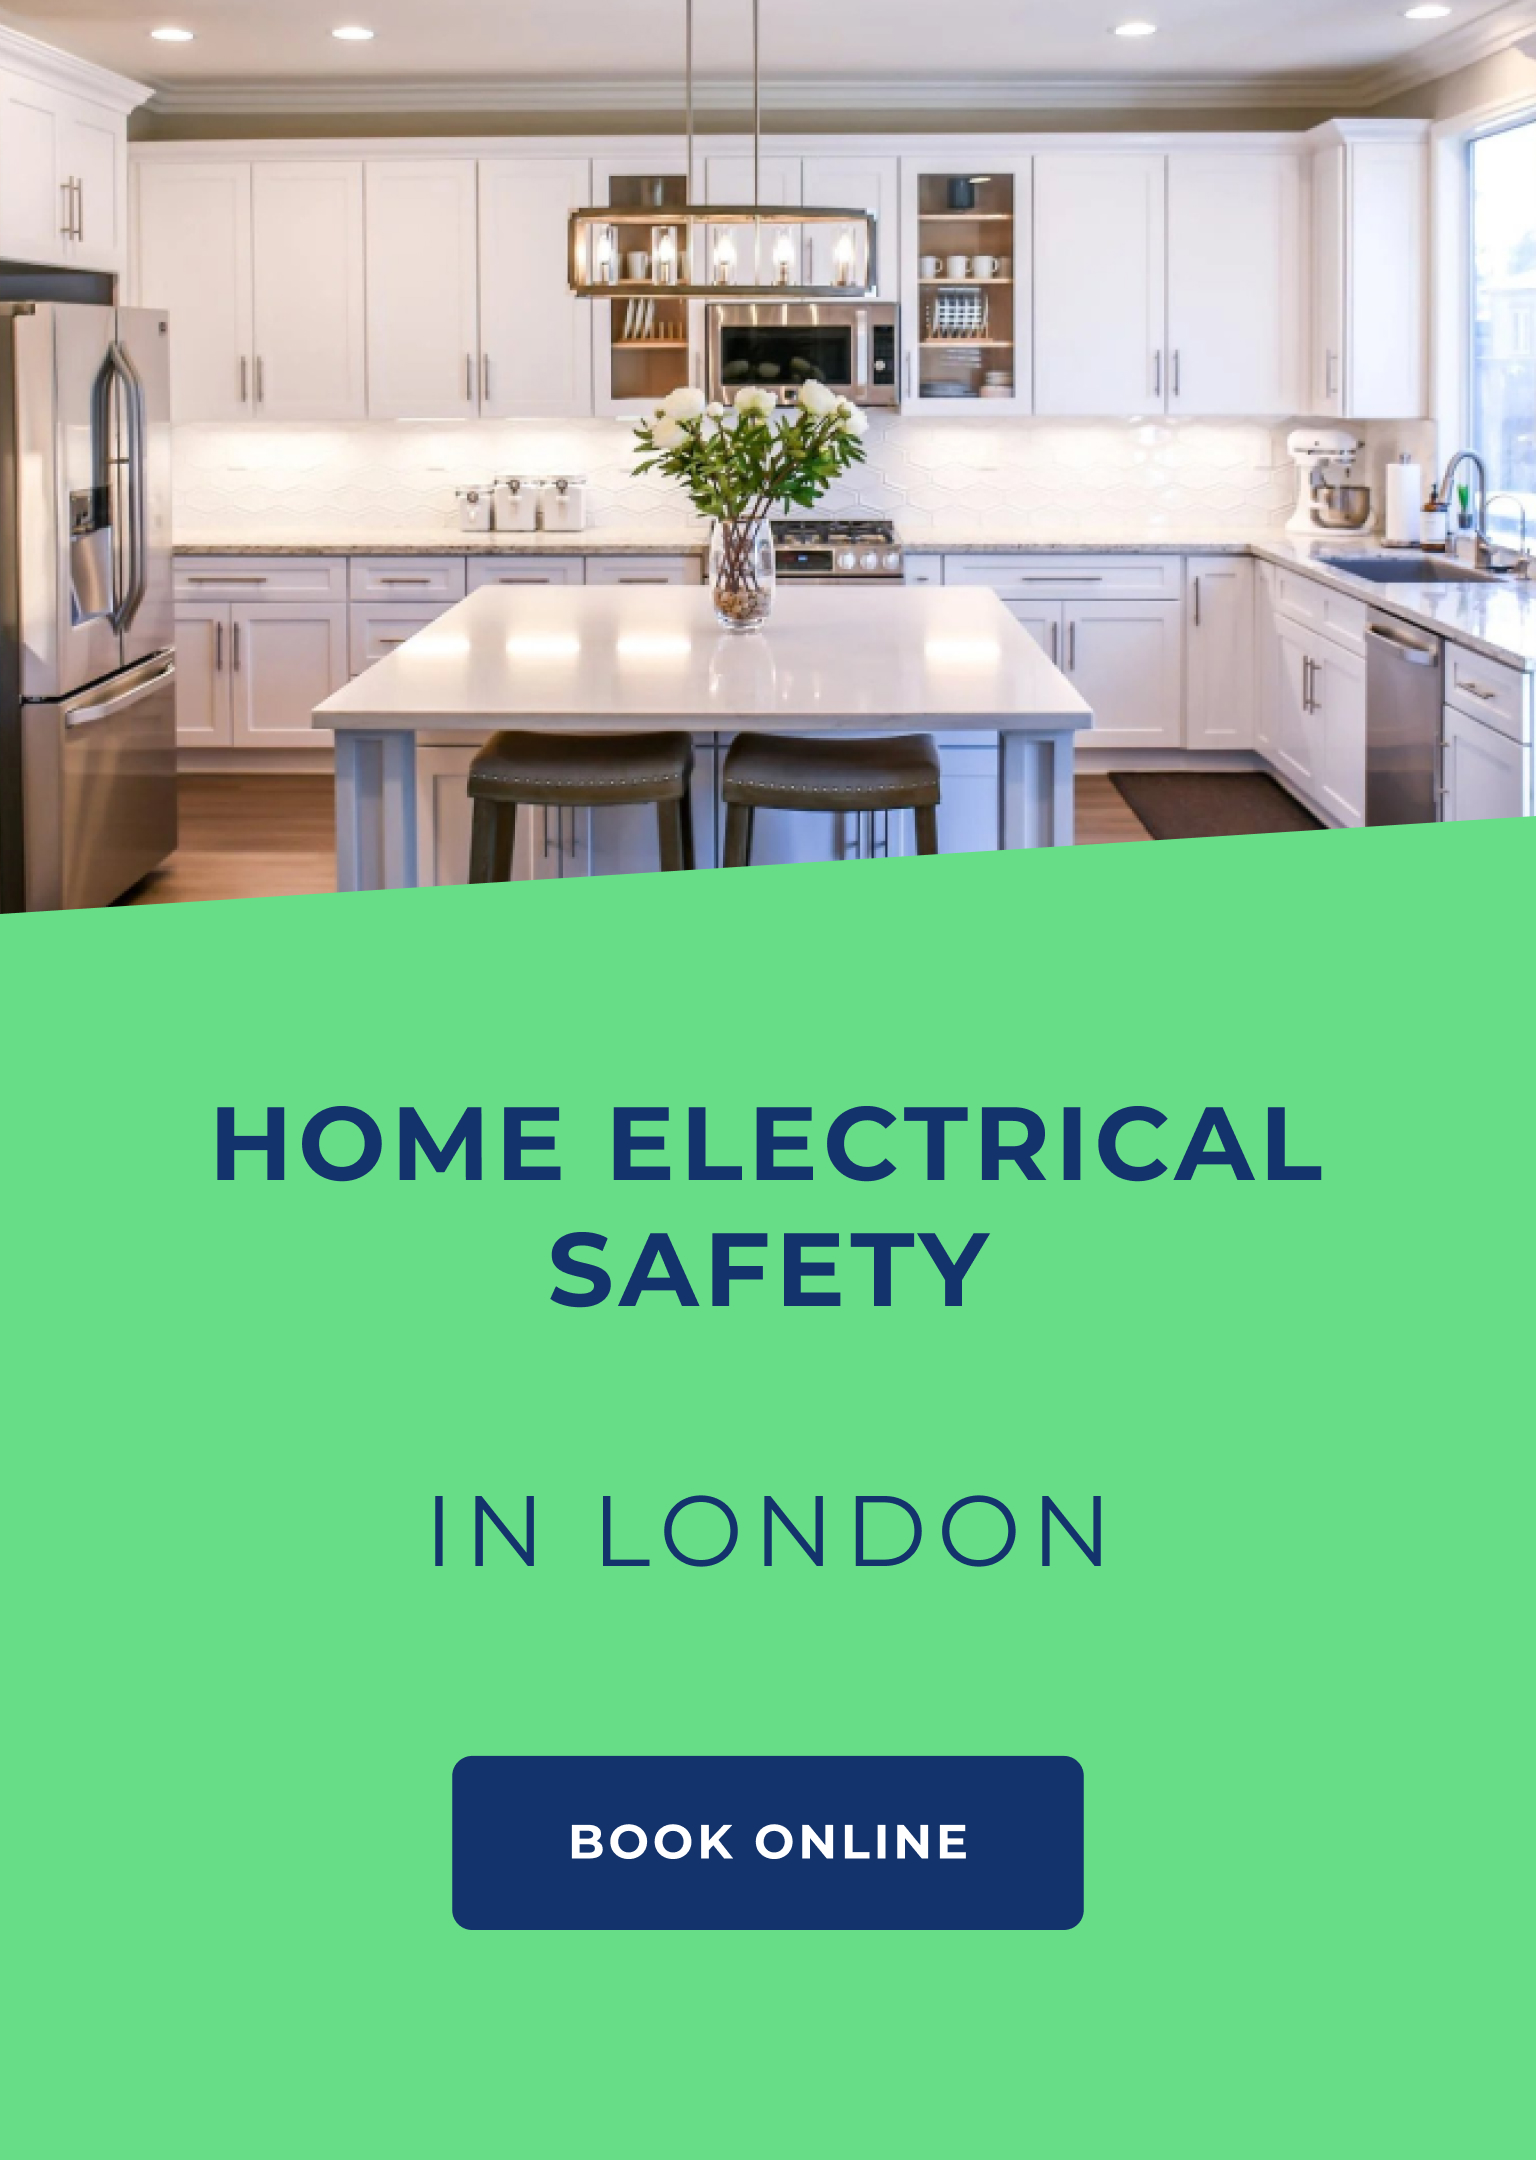 Electrical home safety in London